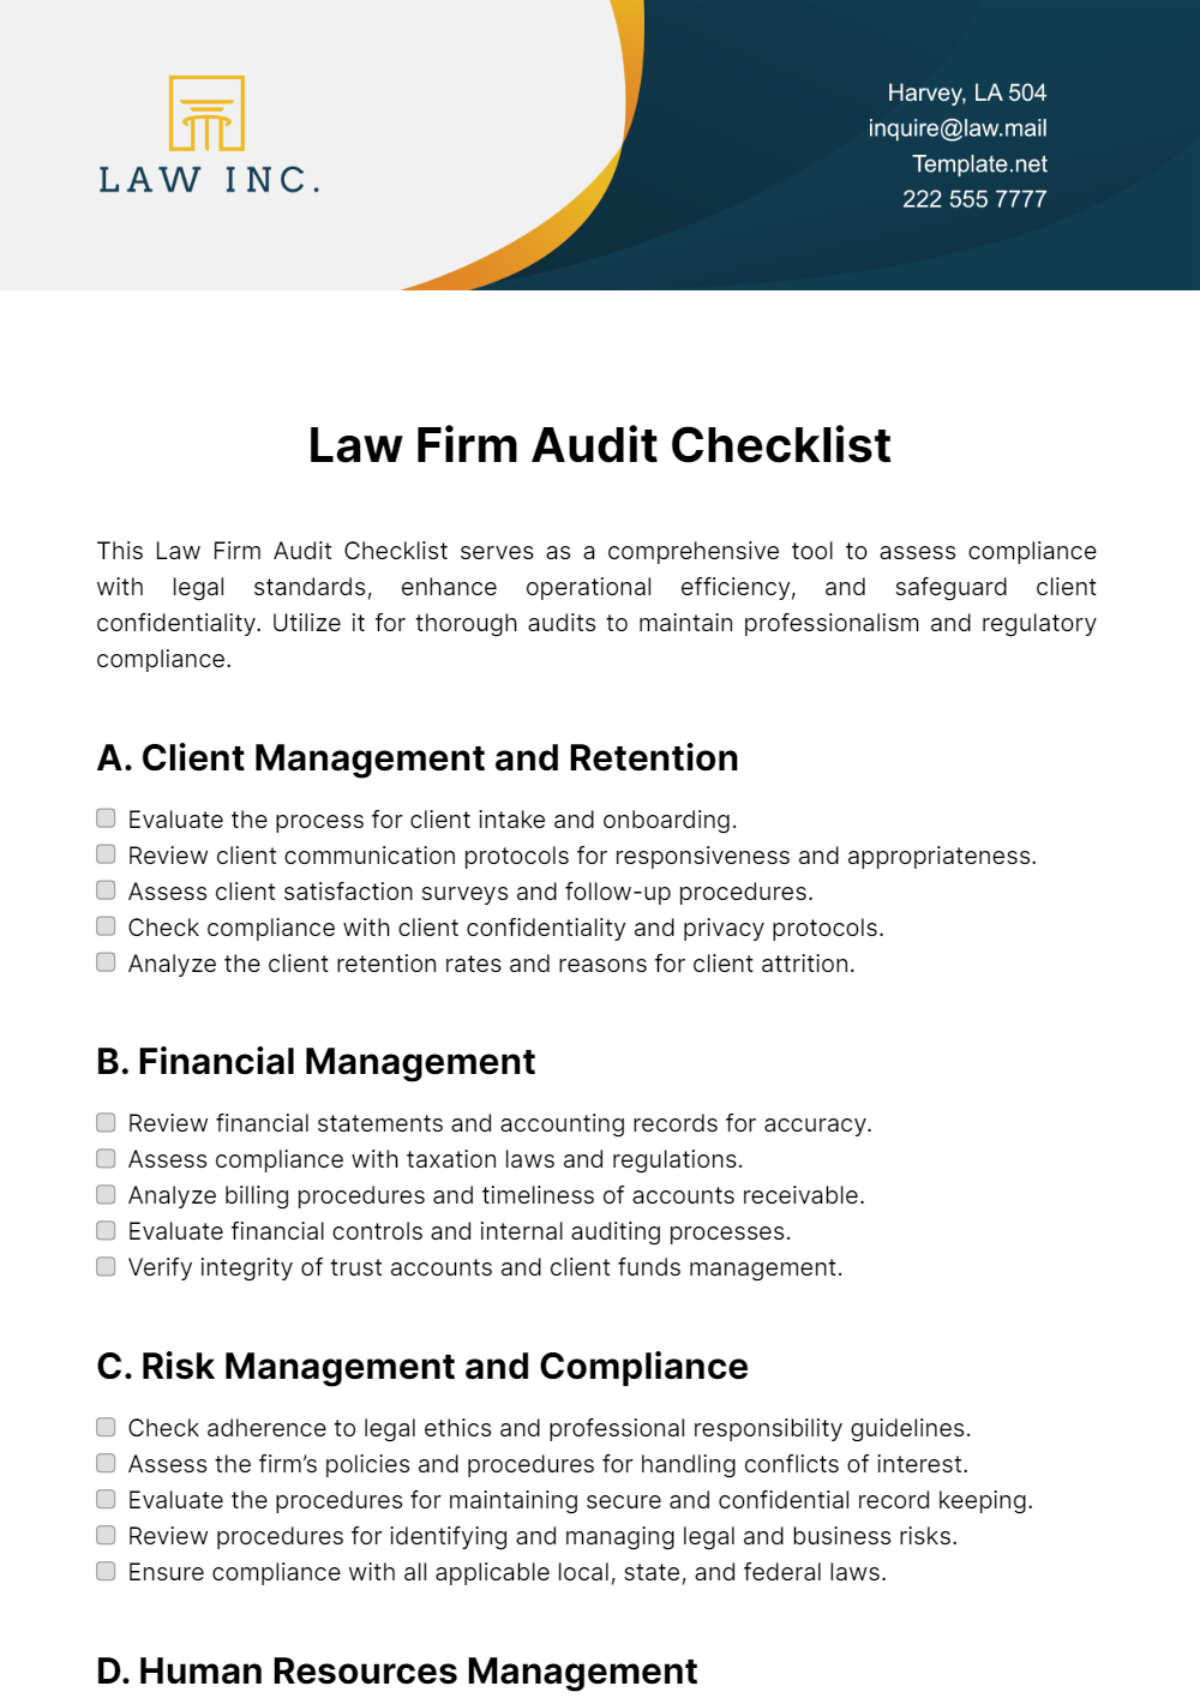 Law Firm Audit Checklist Template